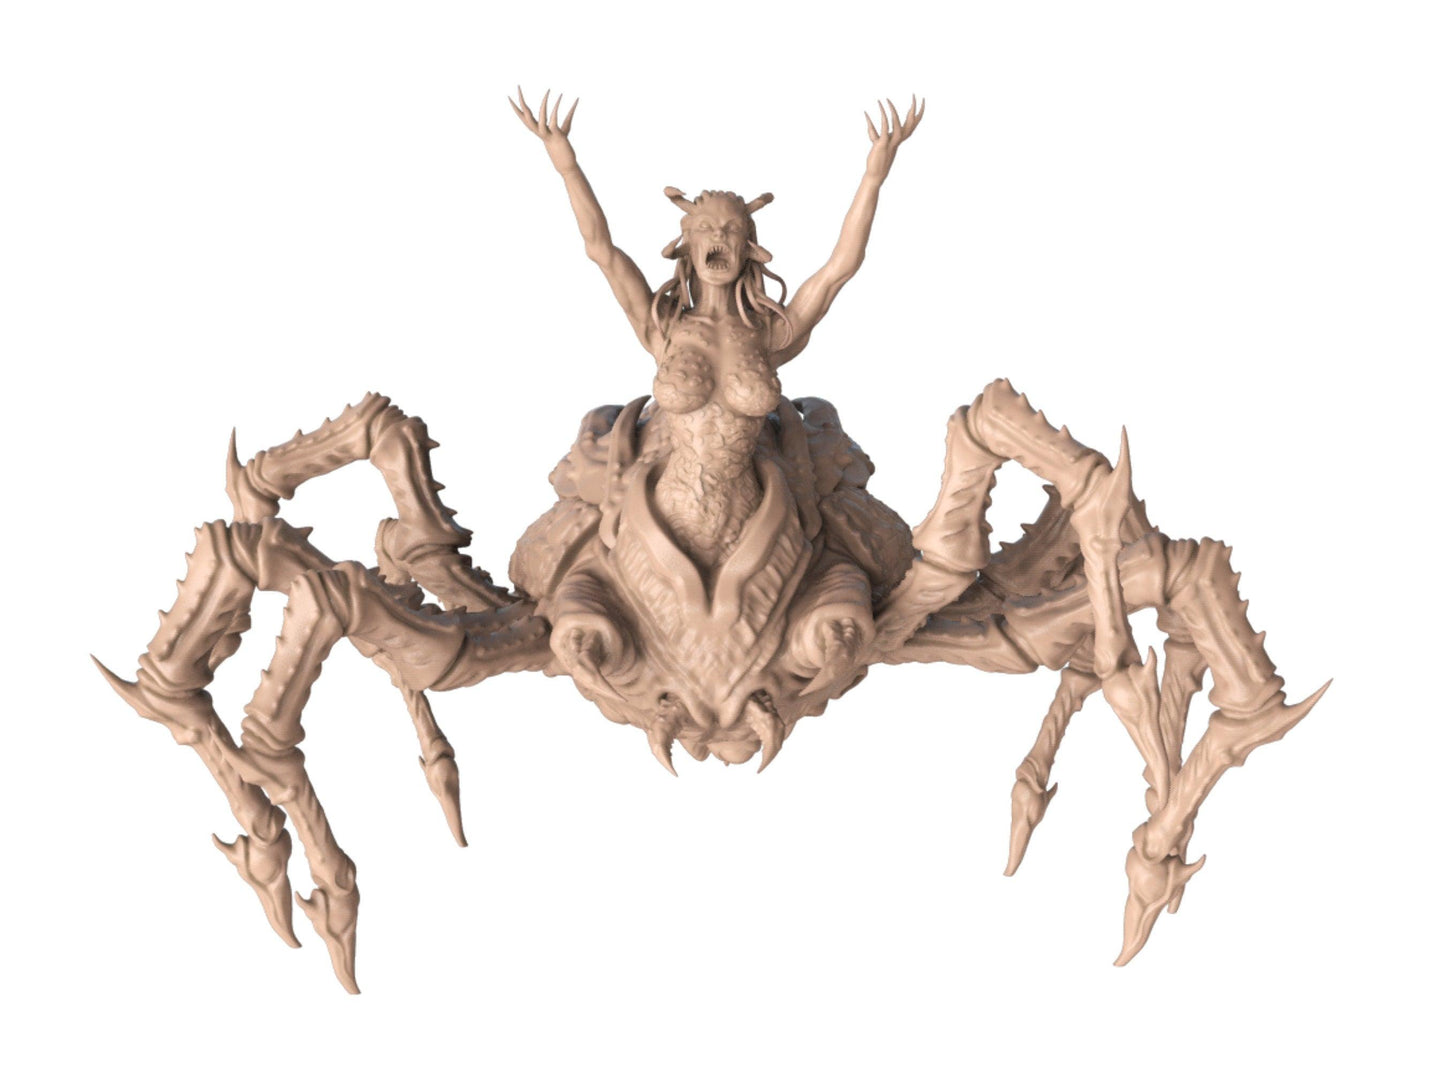 Queen Spider Miniature - 4 Poses - 32mm scale Tabletop gaming DnD Miniature Dungeons and Dragons dnd monster manual - Plague Miniatures shop for DnD Miniatures